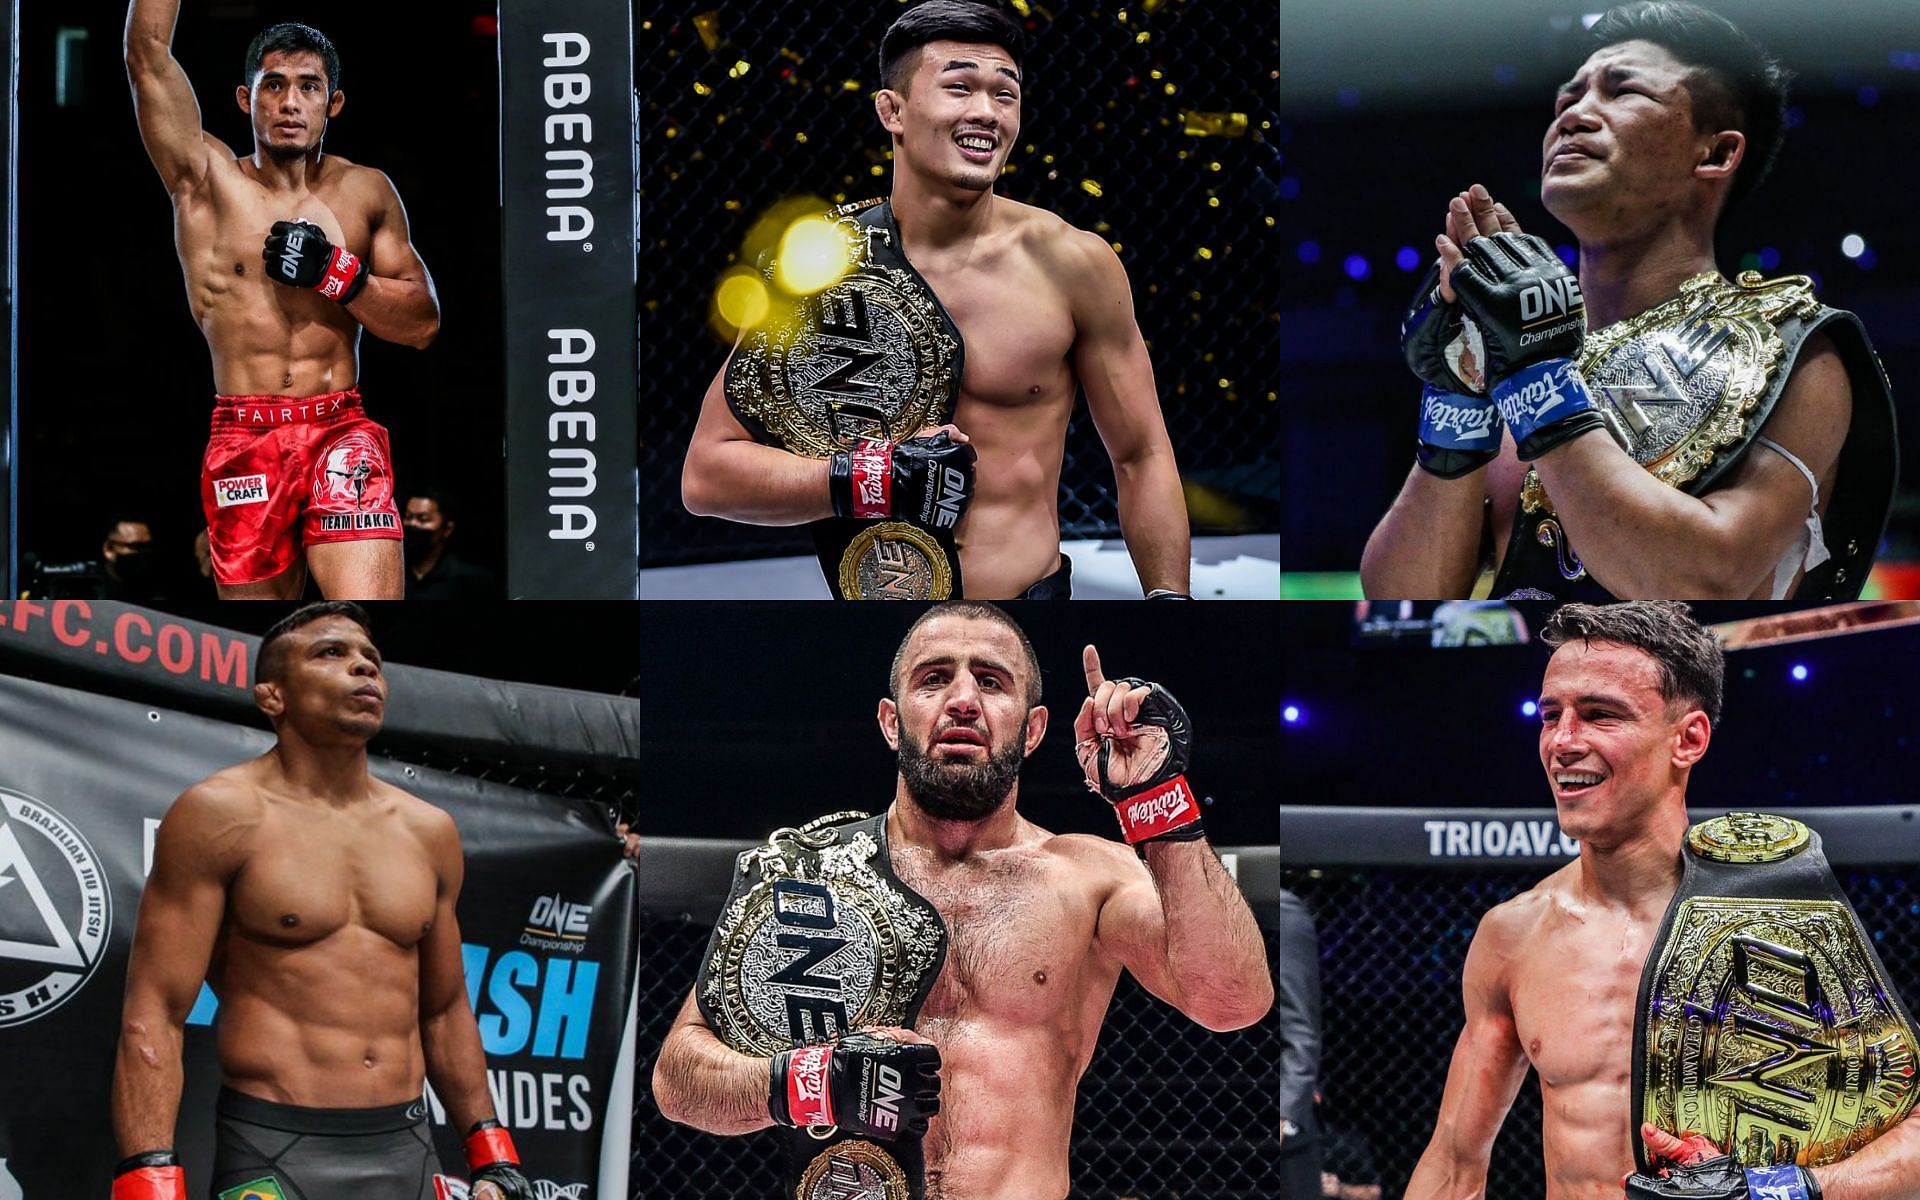 From left to right (top) Stephen Loman, Christian Lee, and Rodtang Jitmuangnon. From left to right (bottom): Bibiano Fernandes, Kiamrian Abbasov, and Joseph Lasiri. | Photo by ONE Championship